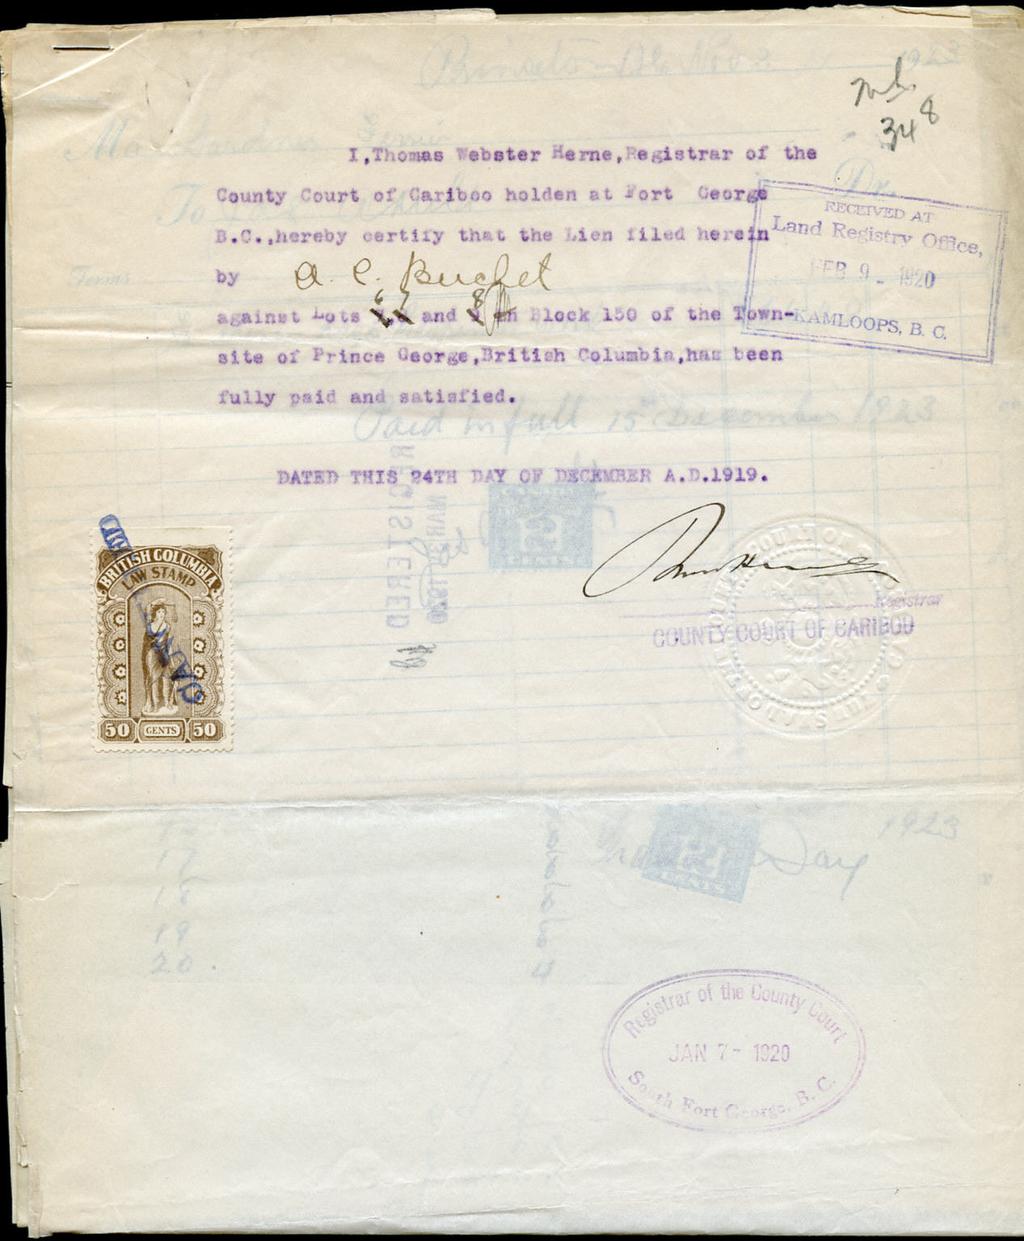 BCL25-50c on attached group of 9 lien related early 1920 s documents. 2 of the other documents have FX36 affixed and one has a pair of FWT7 War Tax affixed.